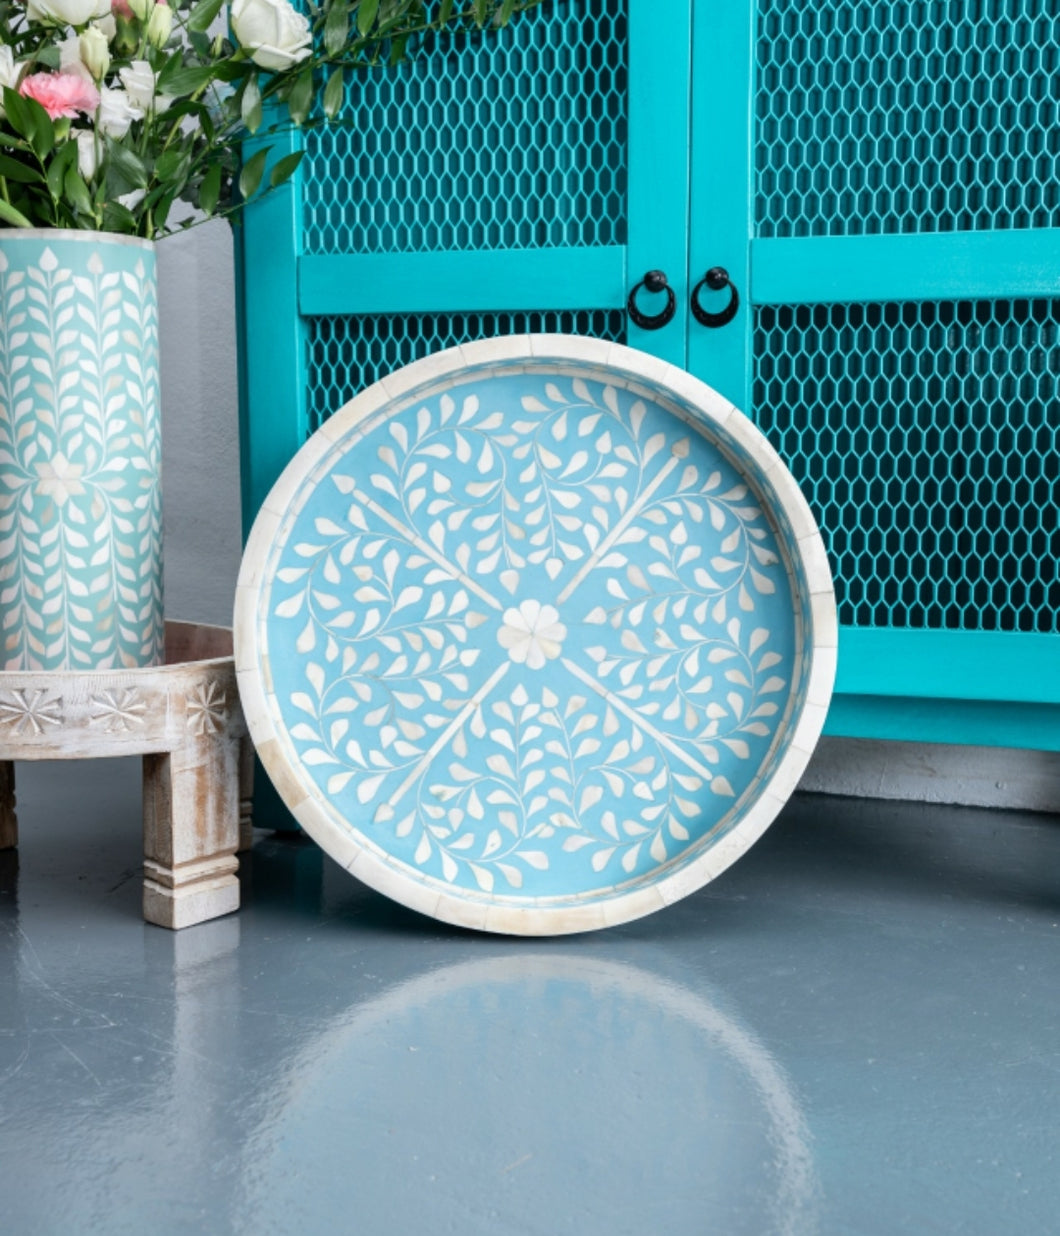 Colin_Bone Inlay Floral Round Tray in Light blue_Dia 46cm